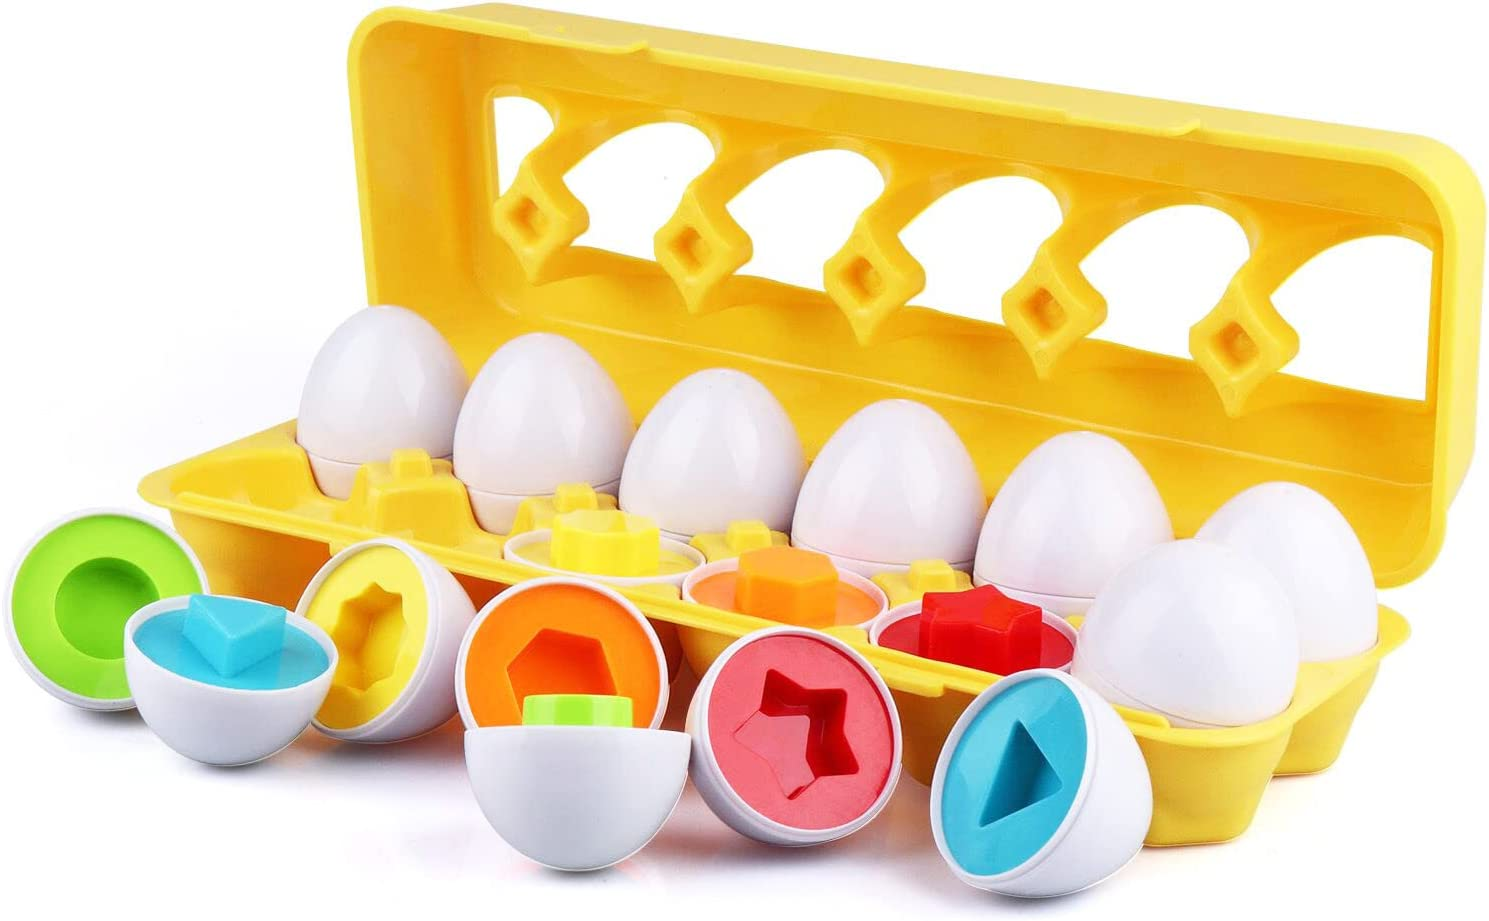 Toddler Toys - Color and Shape Matching Eggs Educational Game - Christmas Easter Gift for Babies 18 Months and Up (12 Eggs)